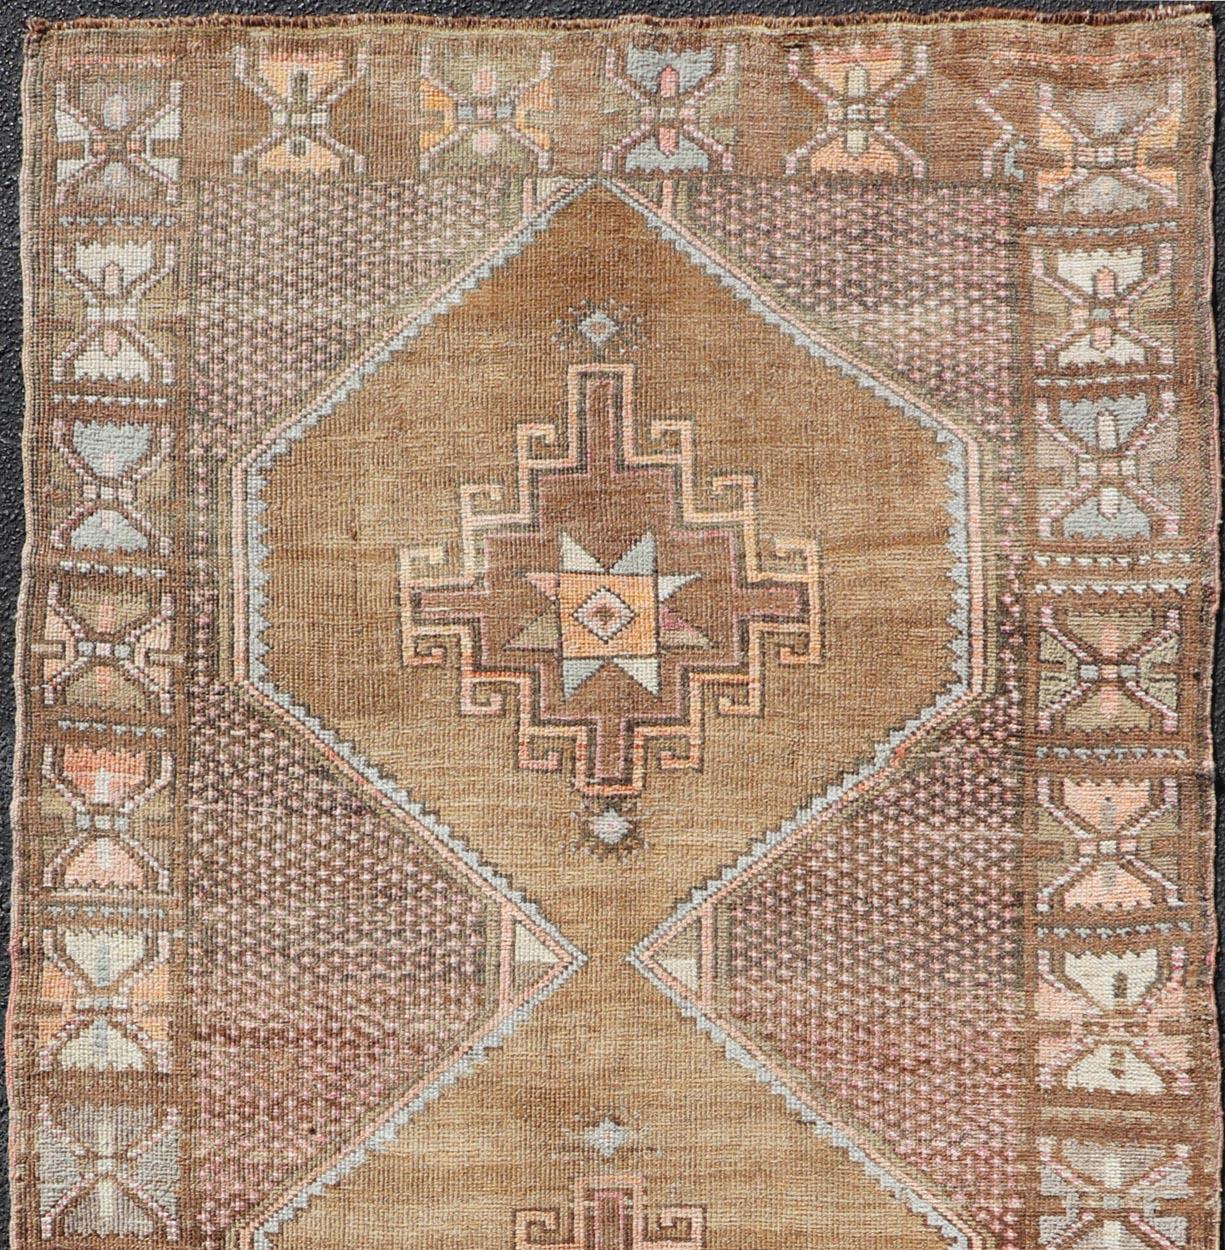 Vintage Turkish runner in Brown background, accent colors, soft red, tan, green, light blue, taupe, rug/TU-MTU-4956, country of origin / type: Turkey / Oushak, circa 1940

Measures: 4'1 x 8'10.